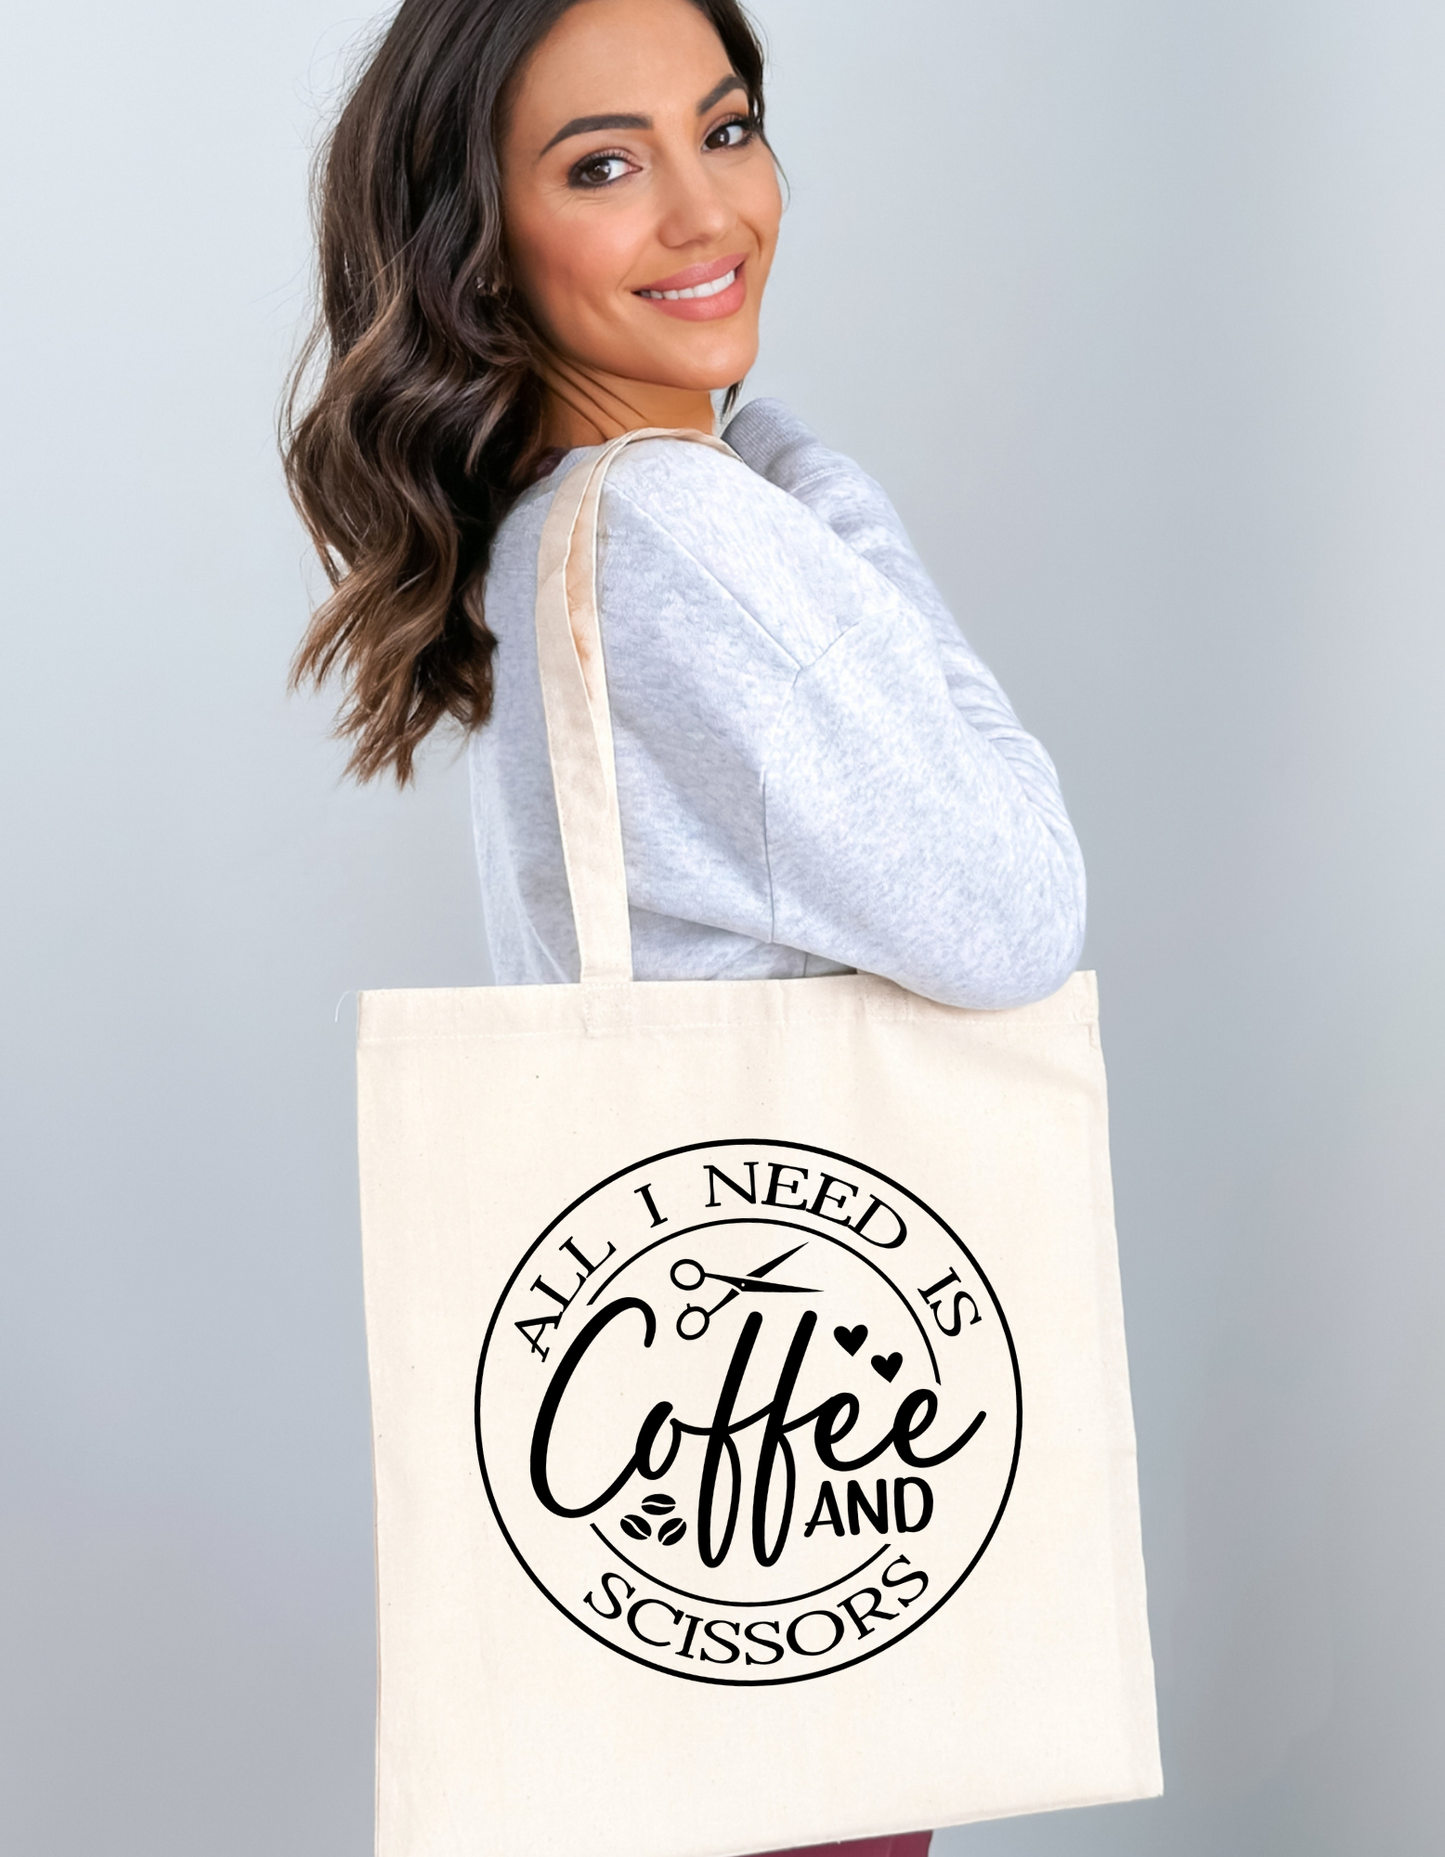 All I need is Coffee and Scissor Tote